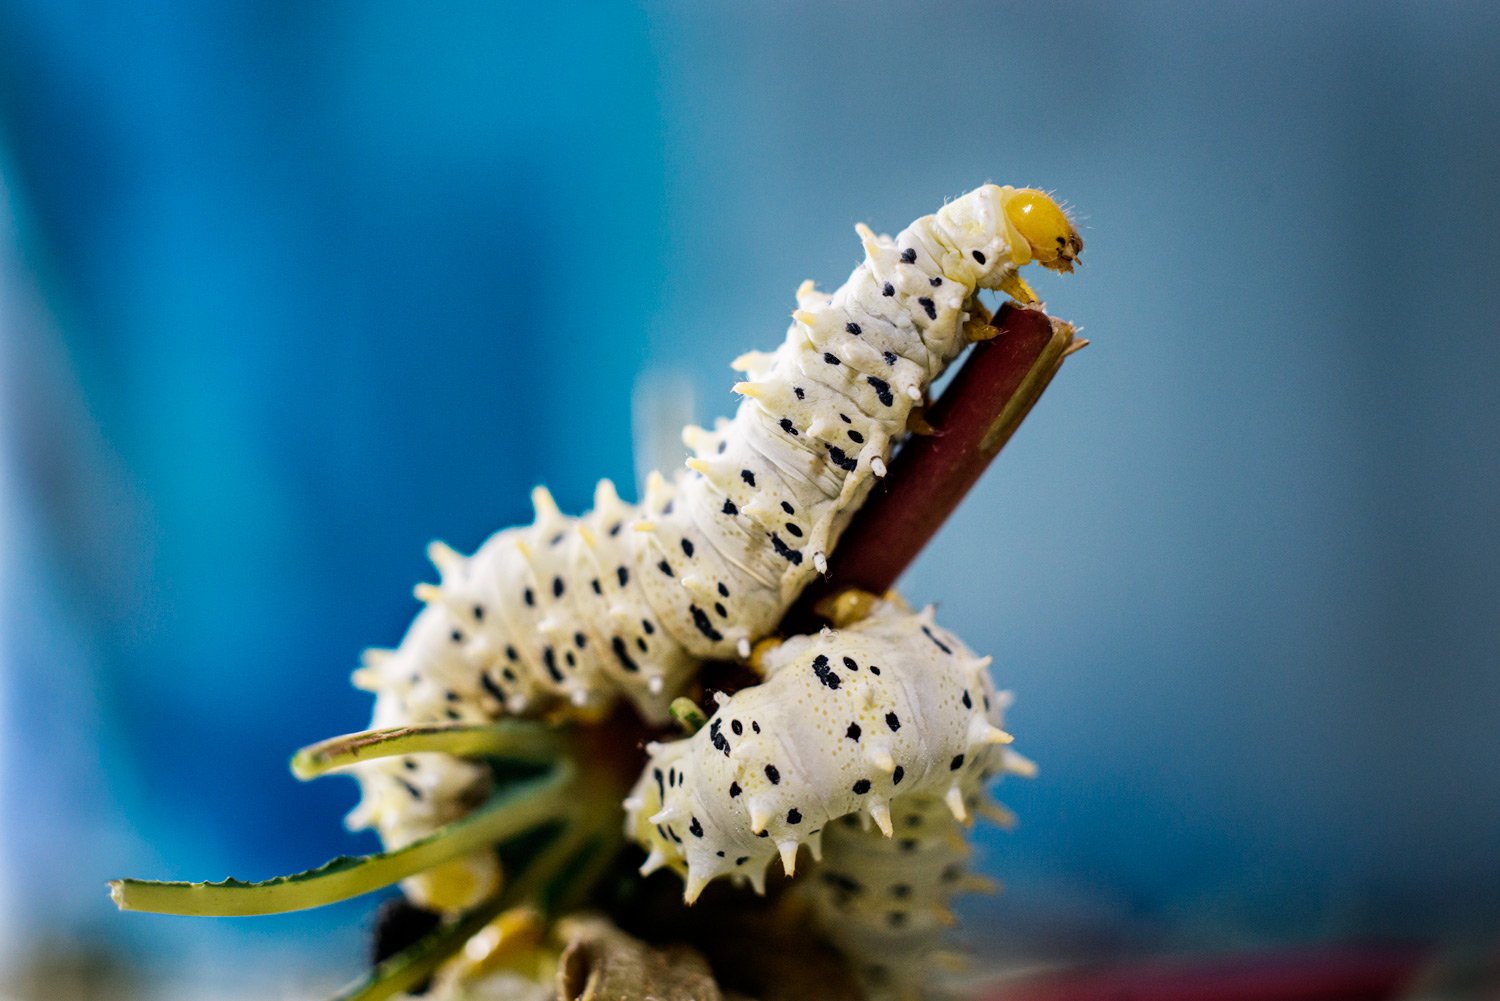 Silk Worms for article on camera or phone